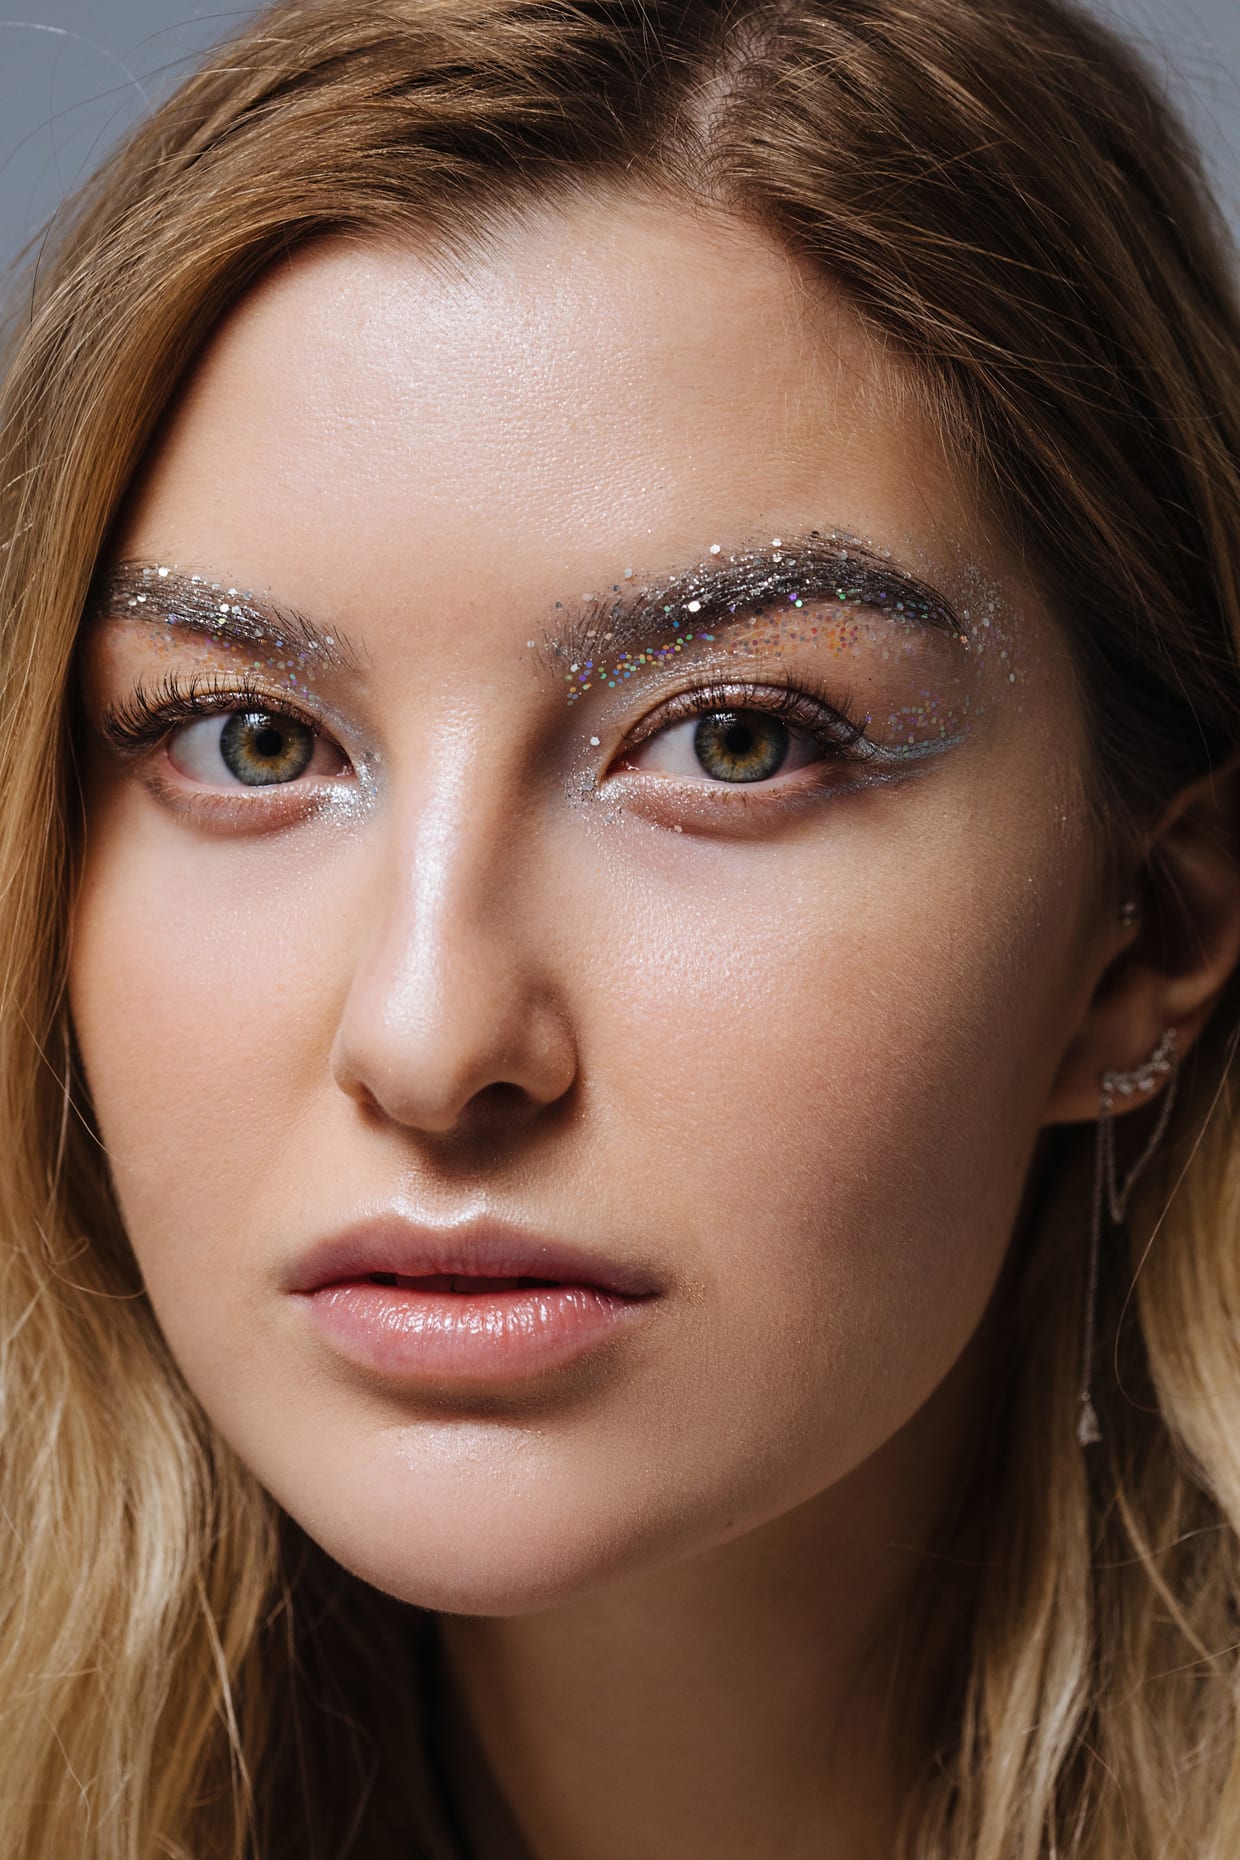 Glitter Makeup That's Easy to Take Off